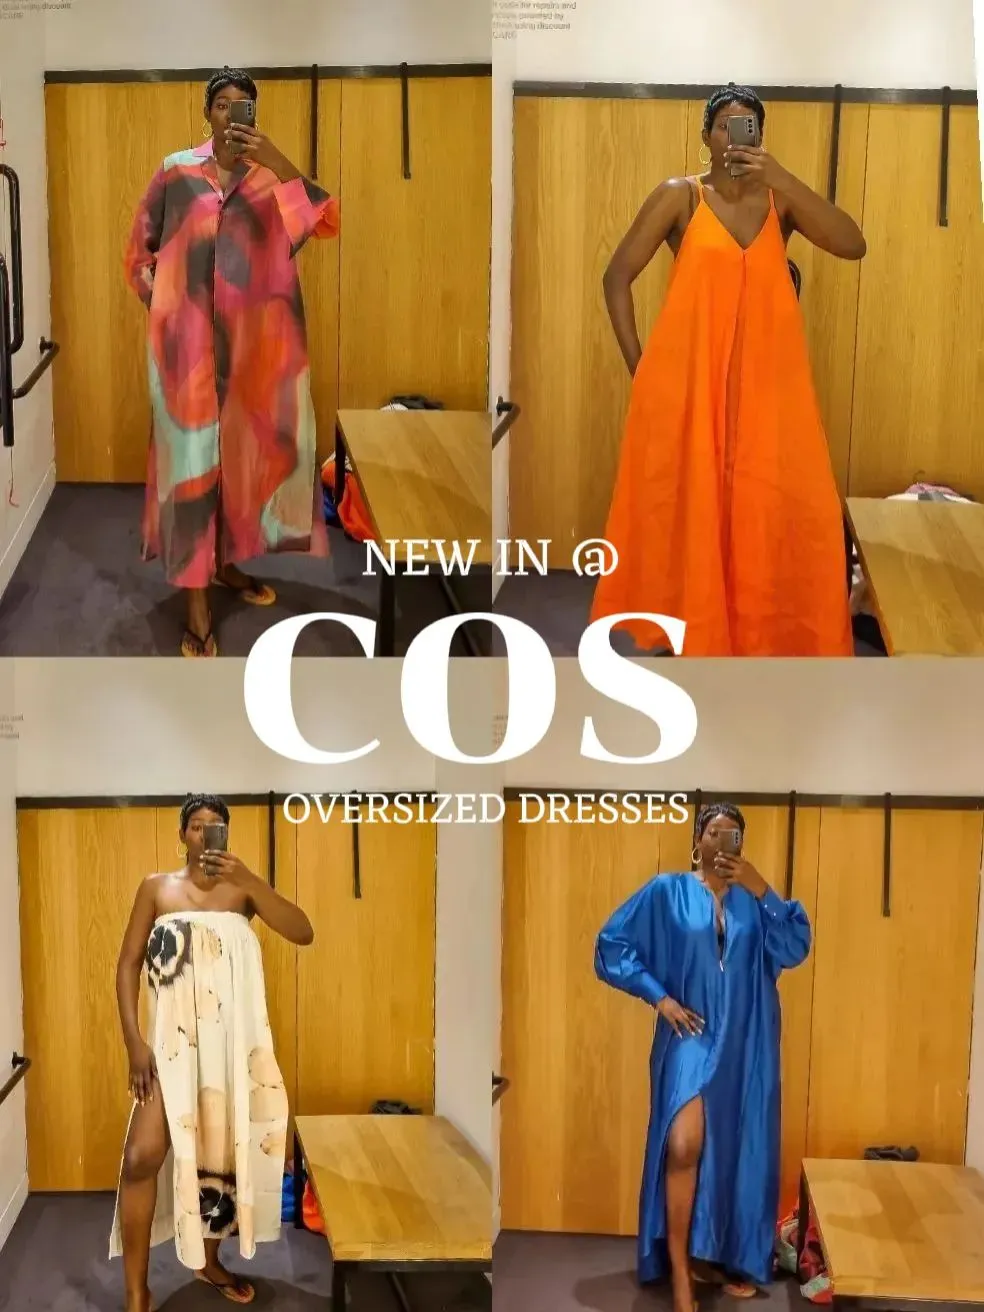 OVERSIZED DRESSES @COS, Gallery posted by sarahs_rails